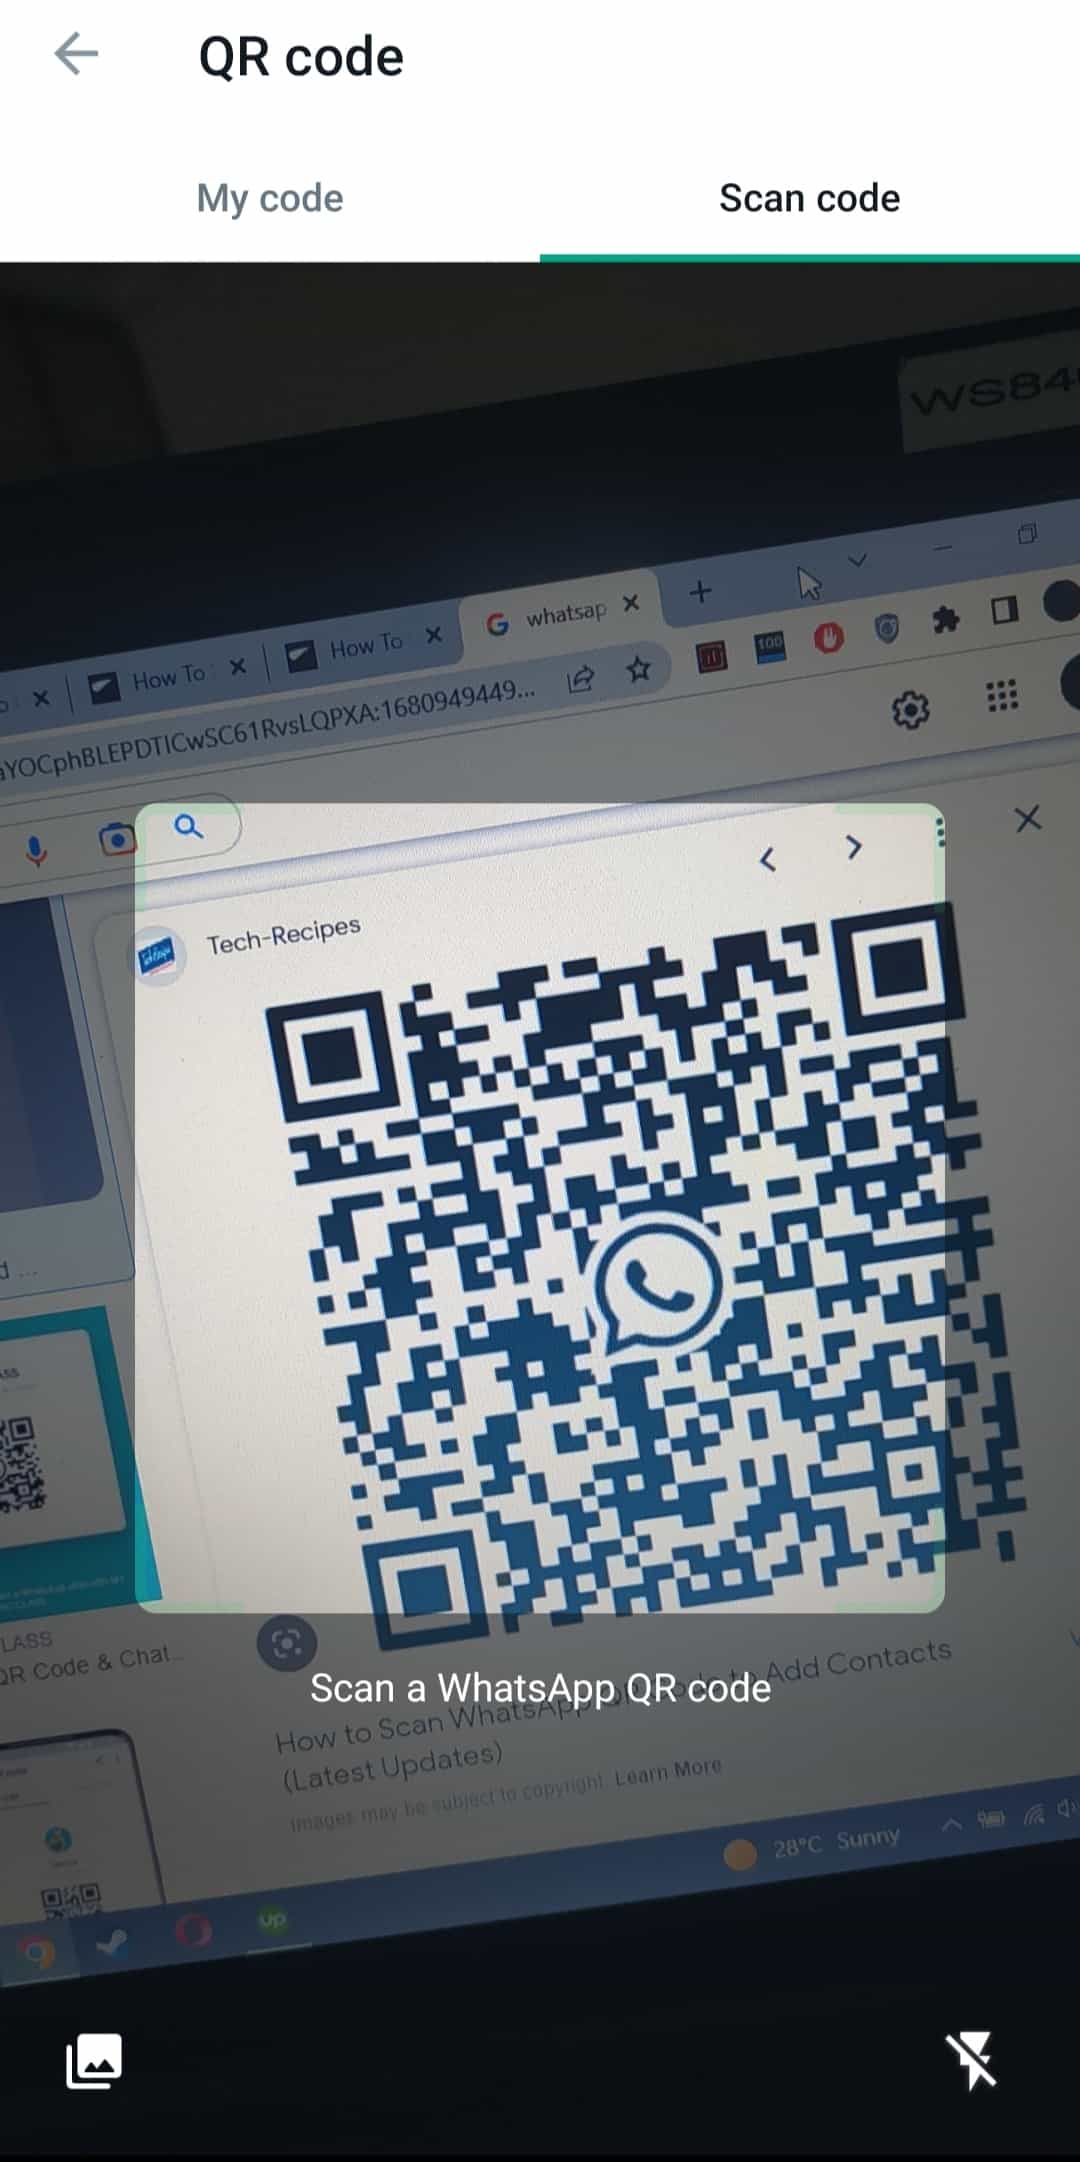 Scan The Qr Code